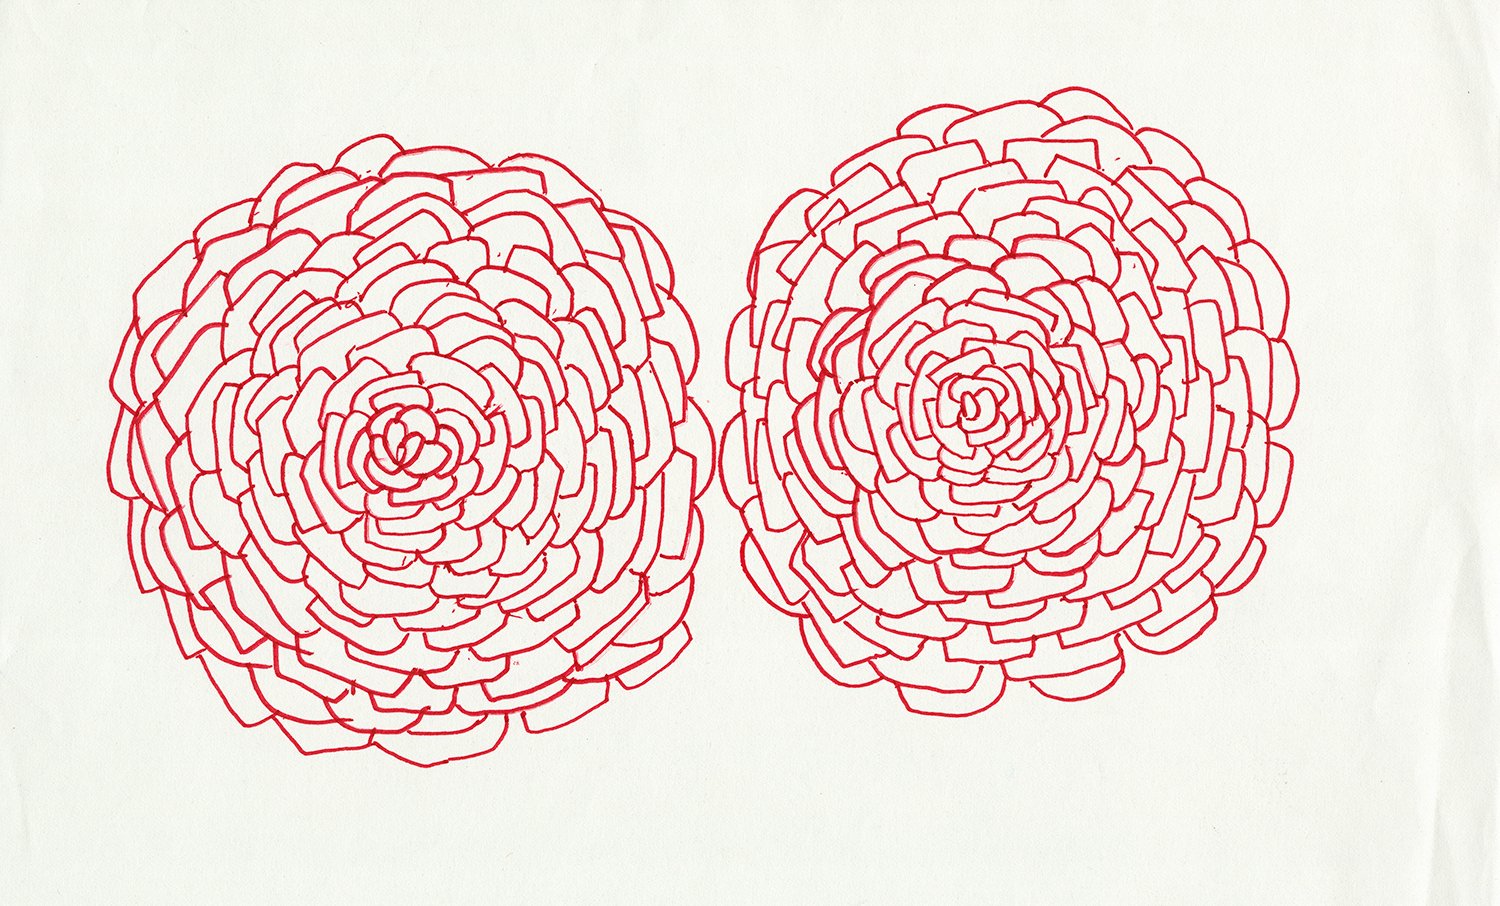 Louise Bourgeois, Untitled (1995)